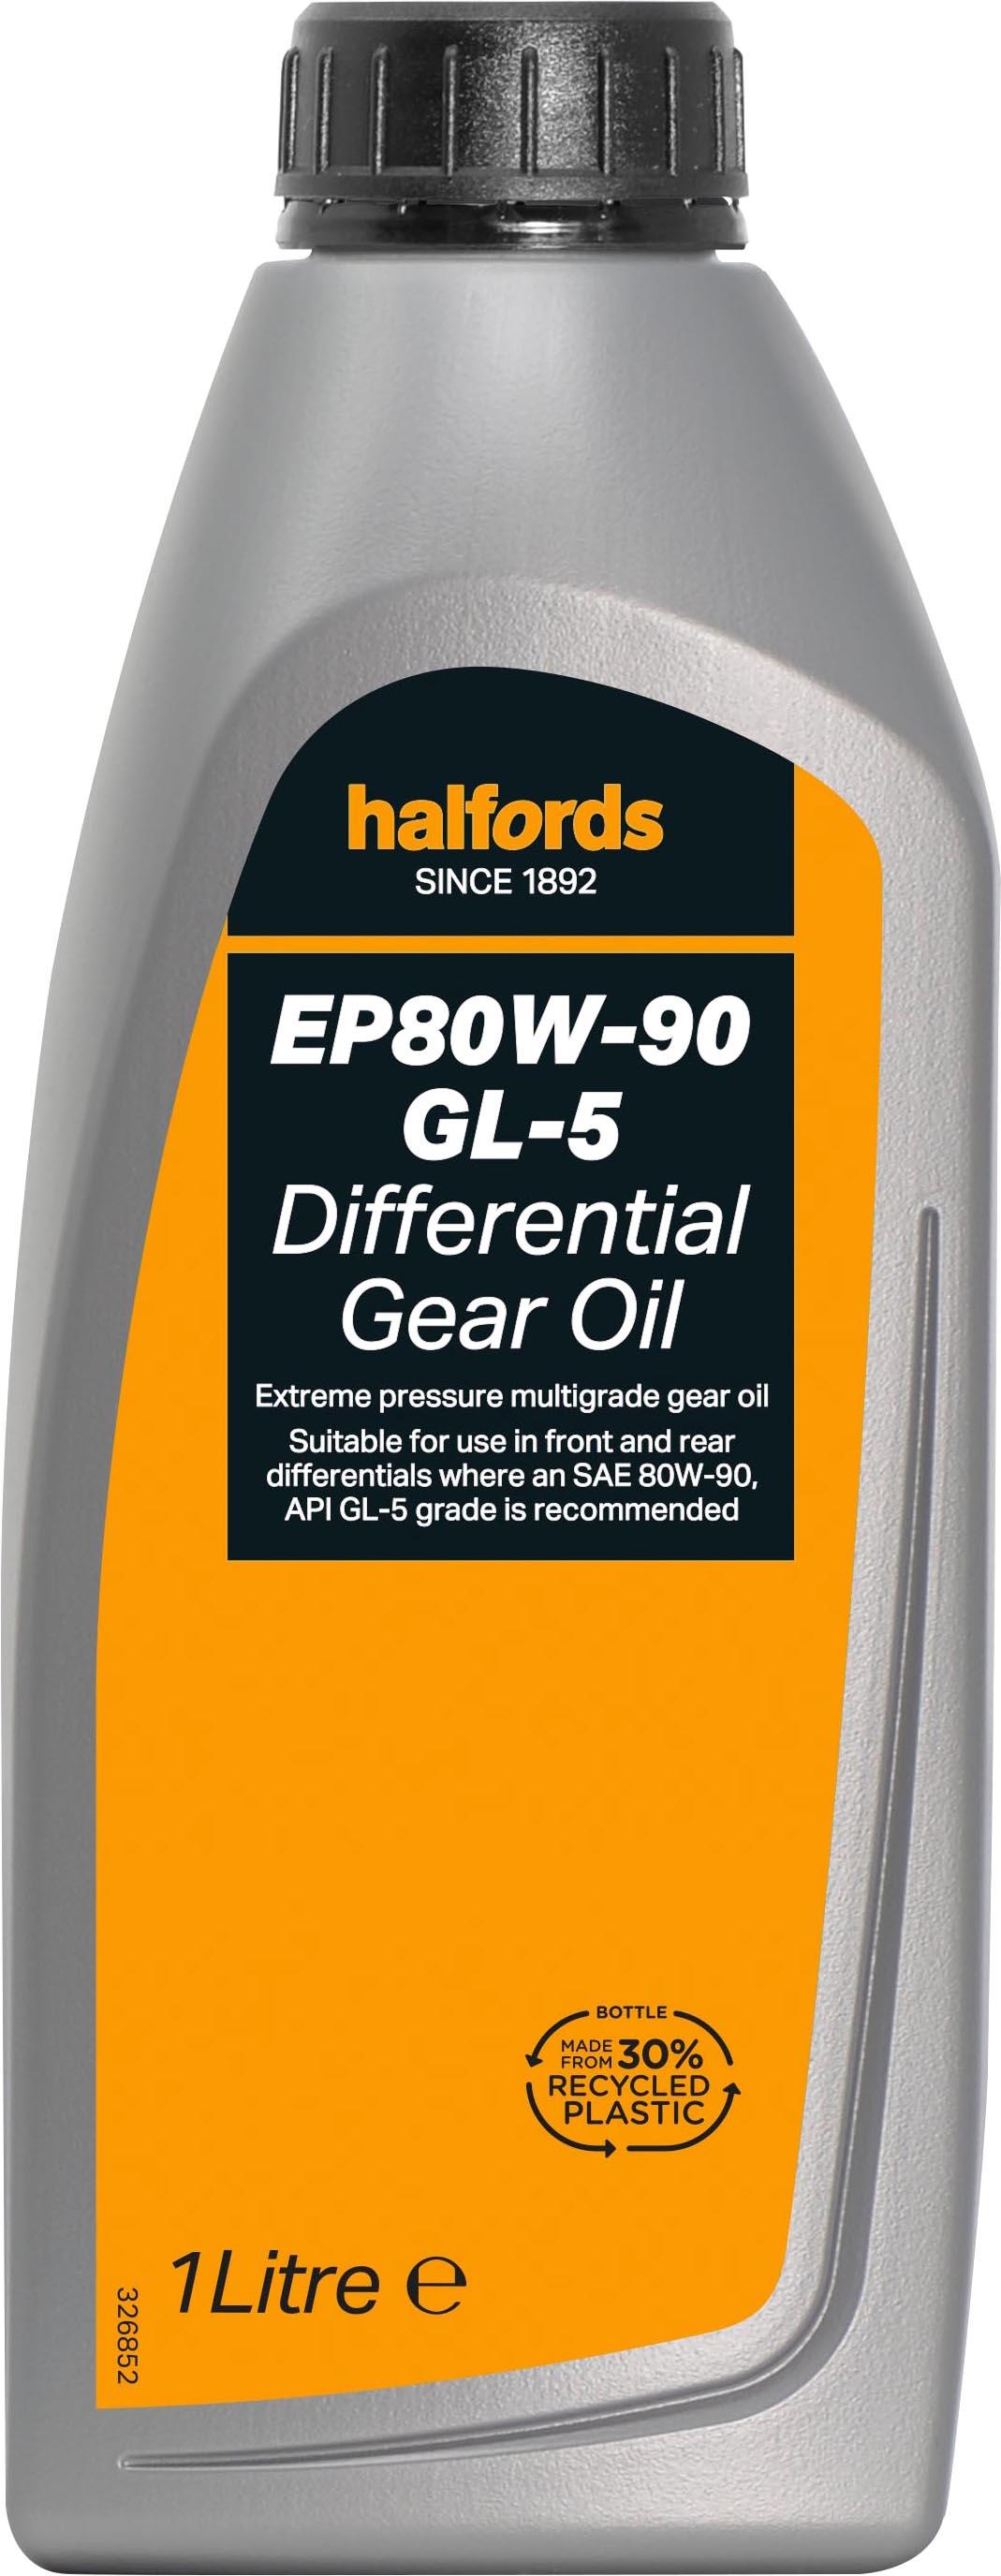 Halfords Differential Gear Oil Ep 80W/90 Gl-5 1L